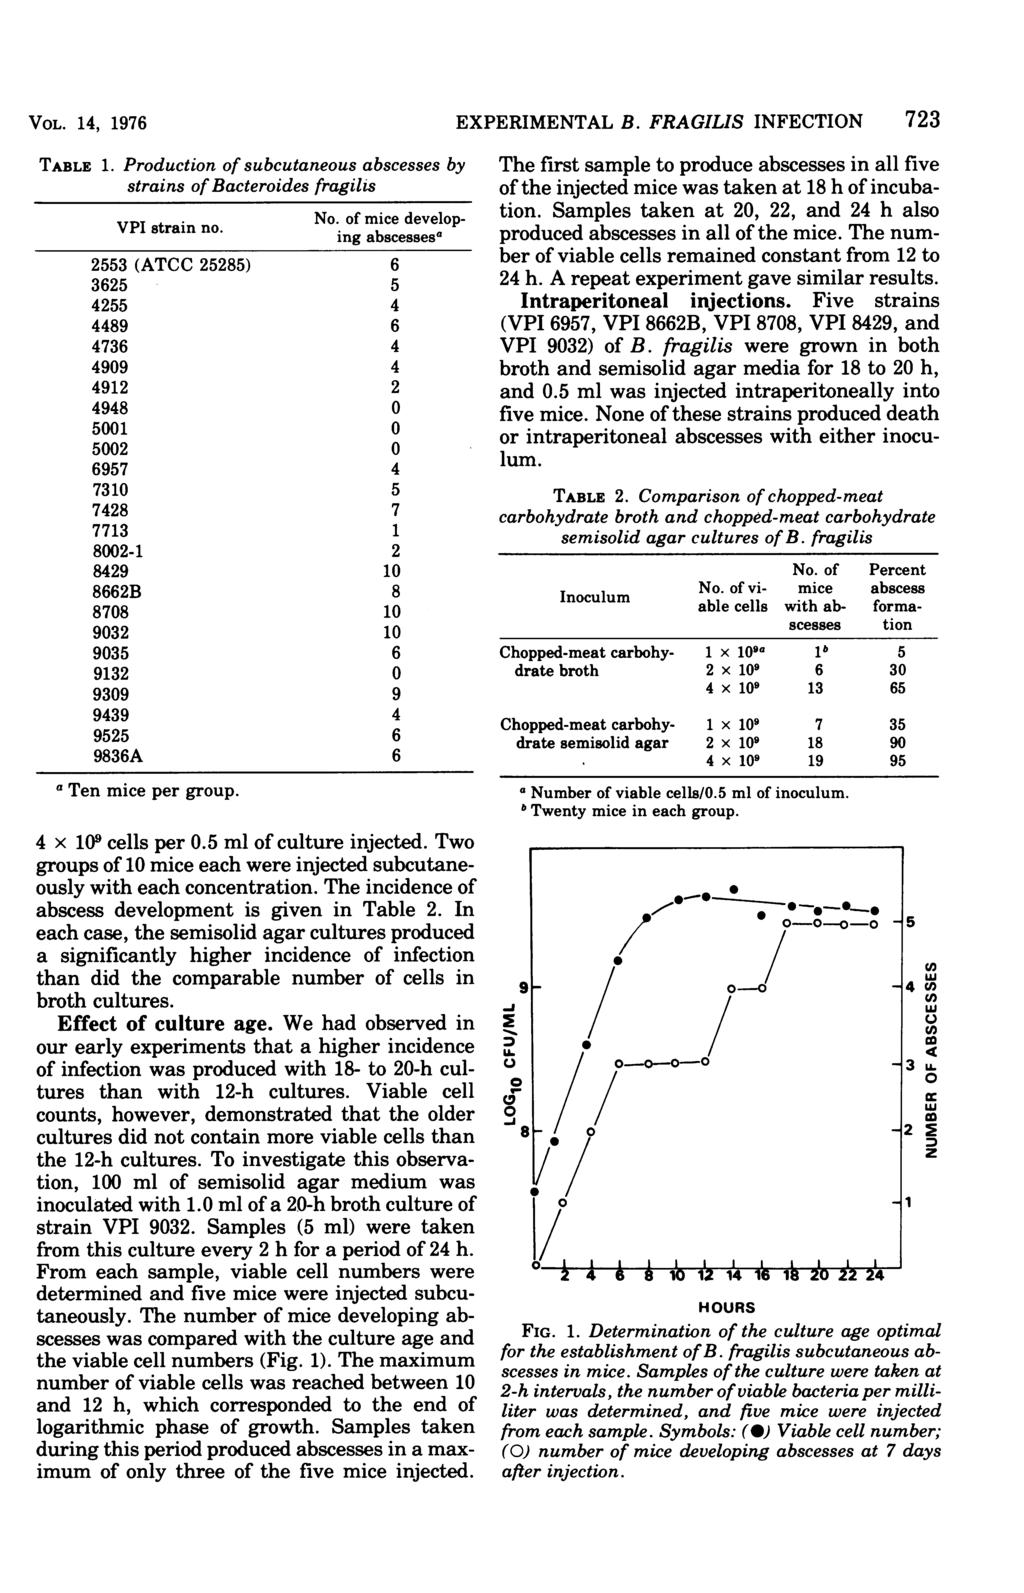 VOL. 14, 1976 TABLE 1. a Production of subcutaneous abscesses by strains of Bacteroides fragilis VPI strain no. No.